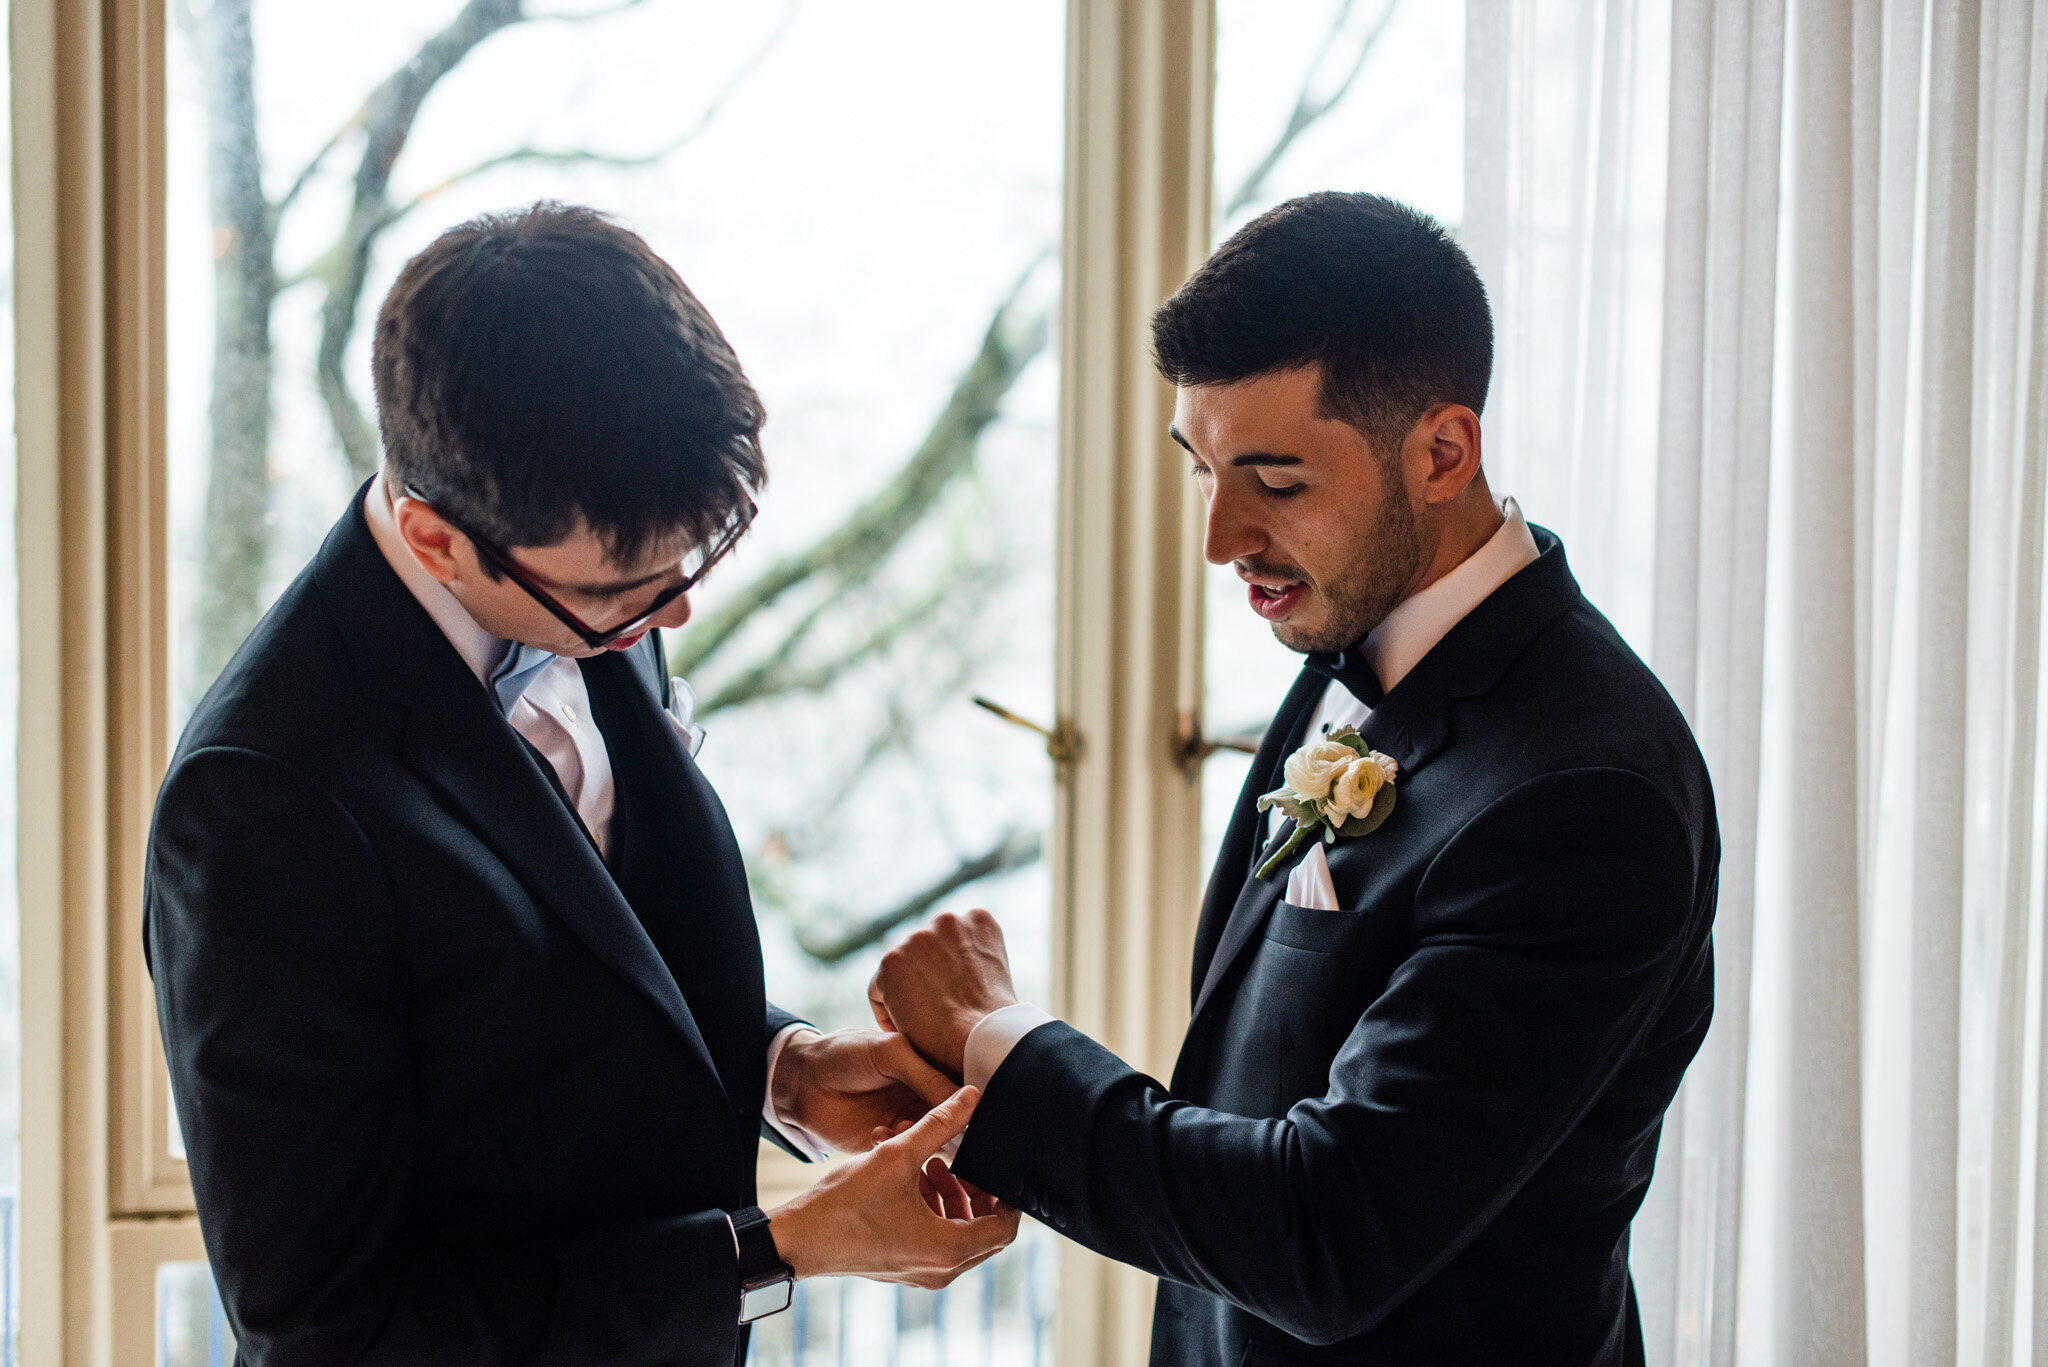 Groom with best man putting on cuff links